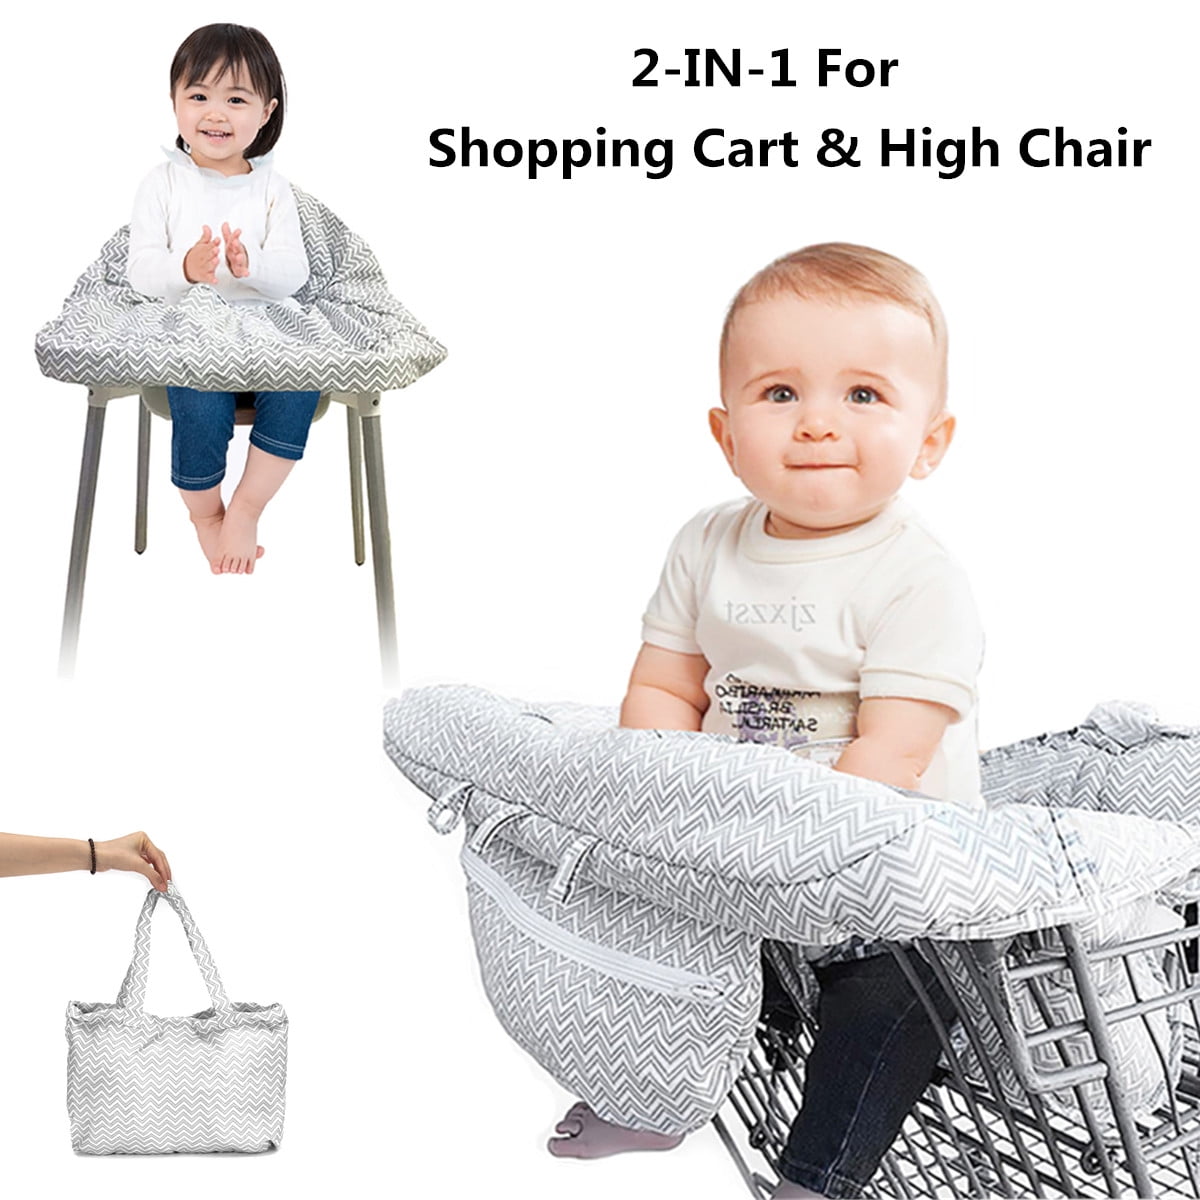 Shopping Cart Cover with Adjustable Safety Belt Anti-Dirty High Chair Shield Pad with Dots Includes Carry Bag for Baby Toddler Kids Children 